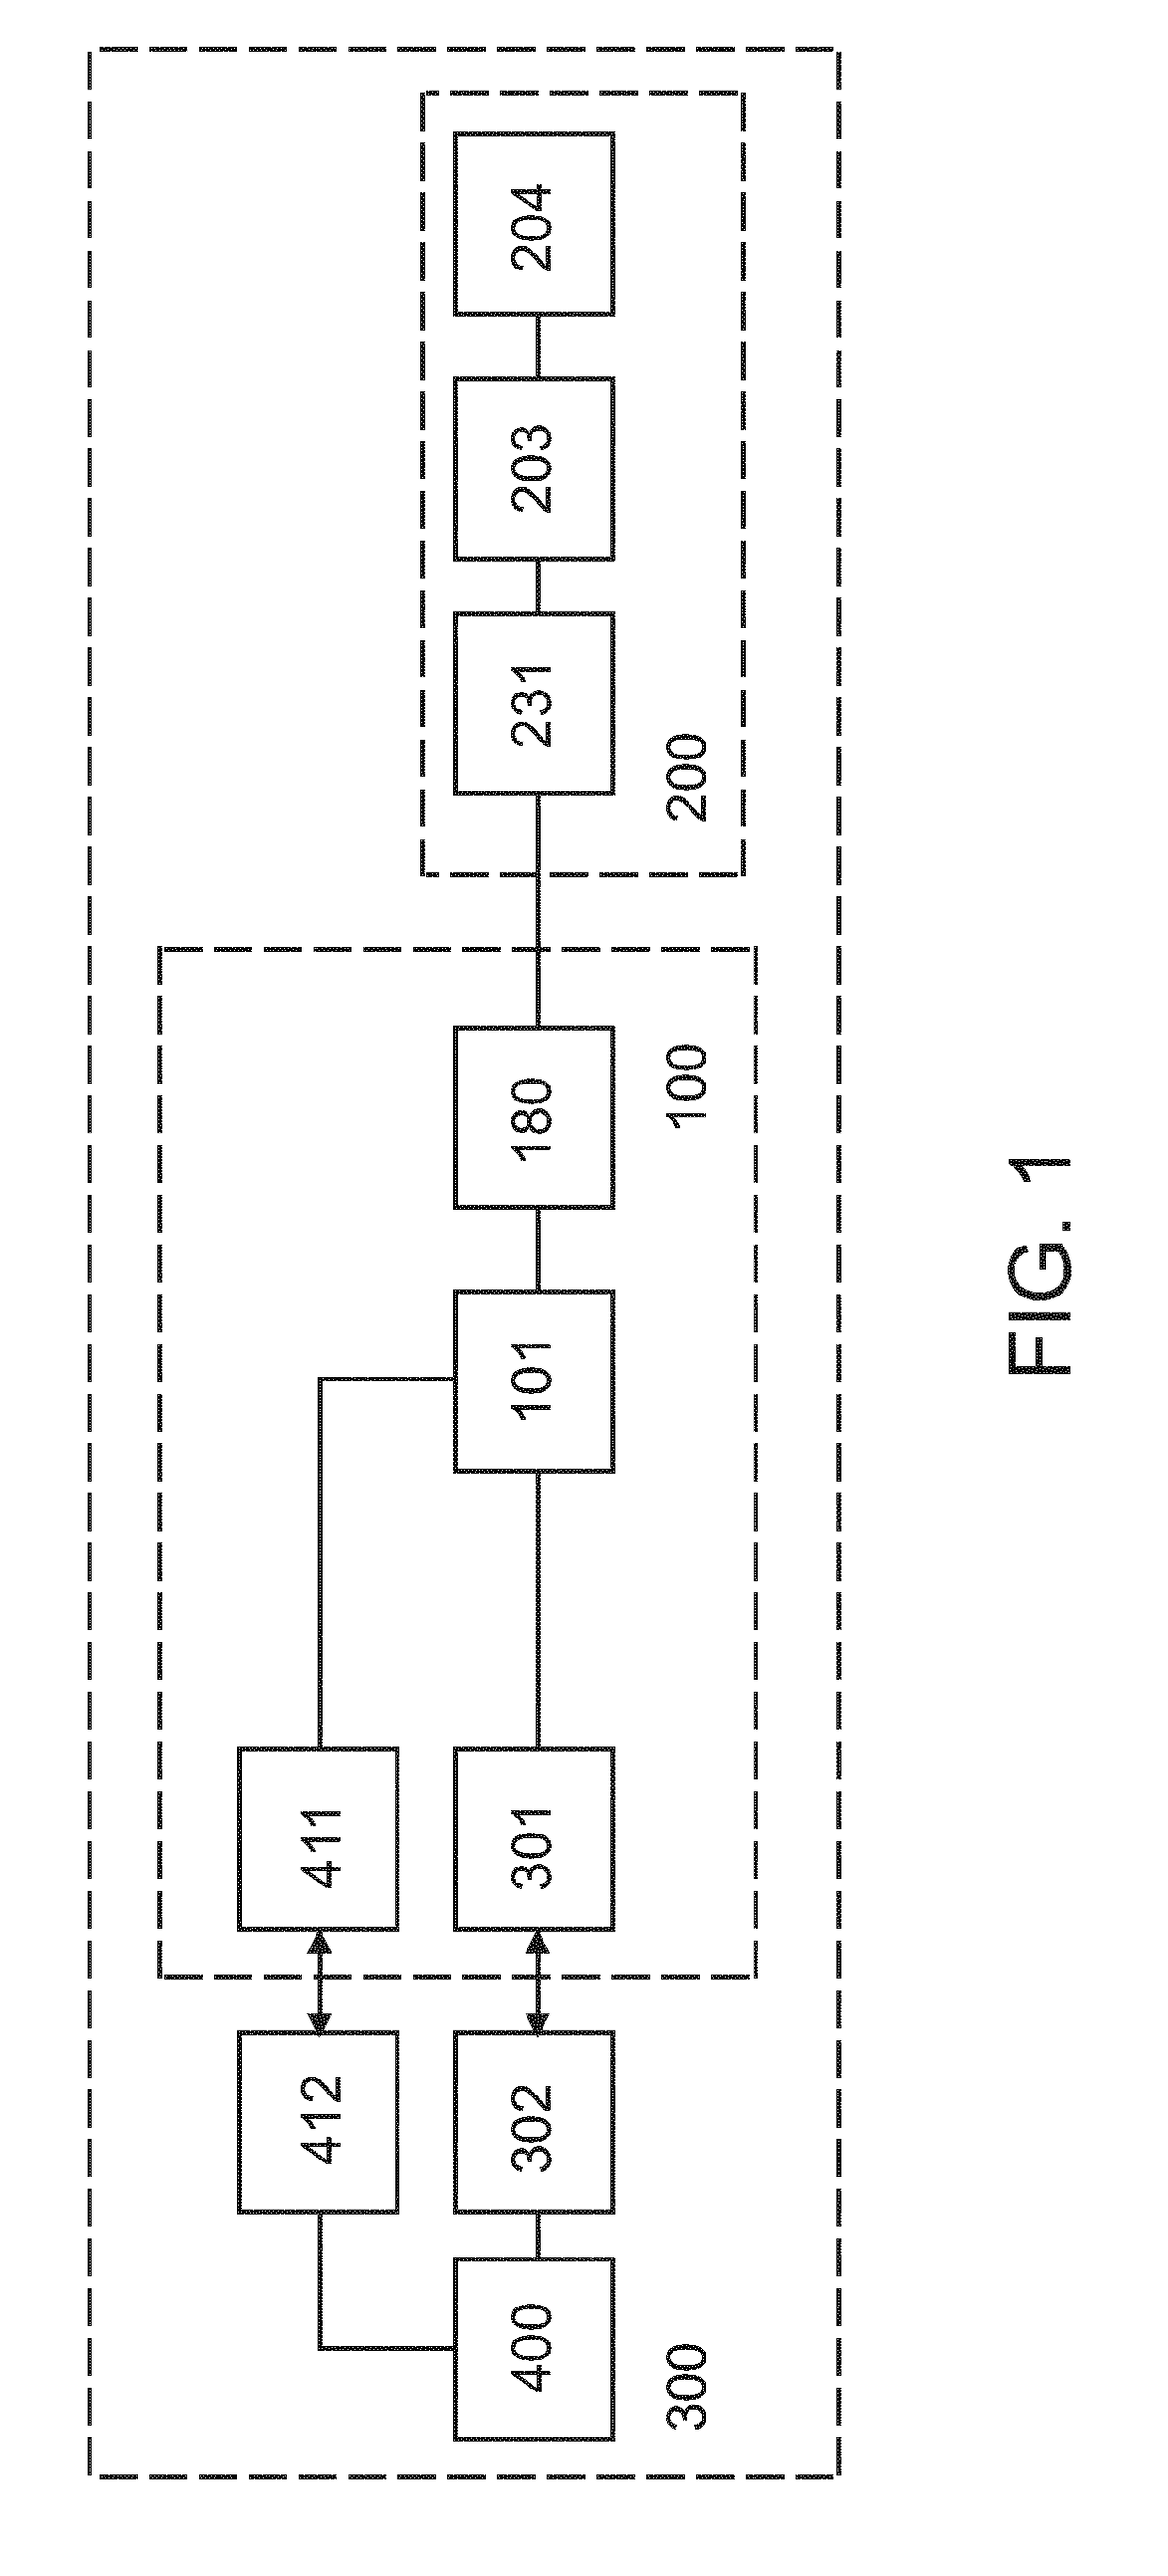 System and method for targeted data communication